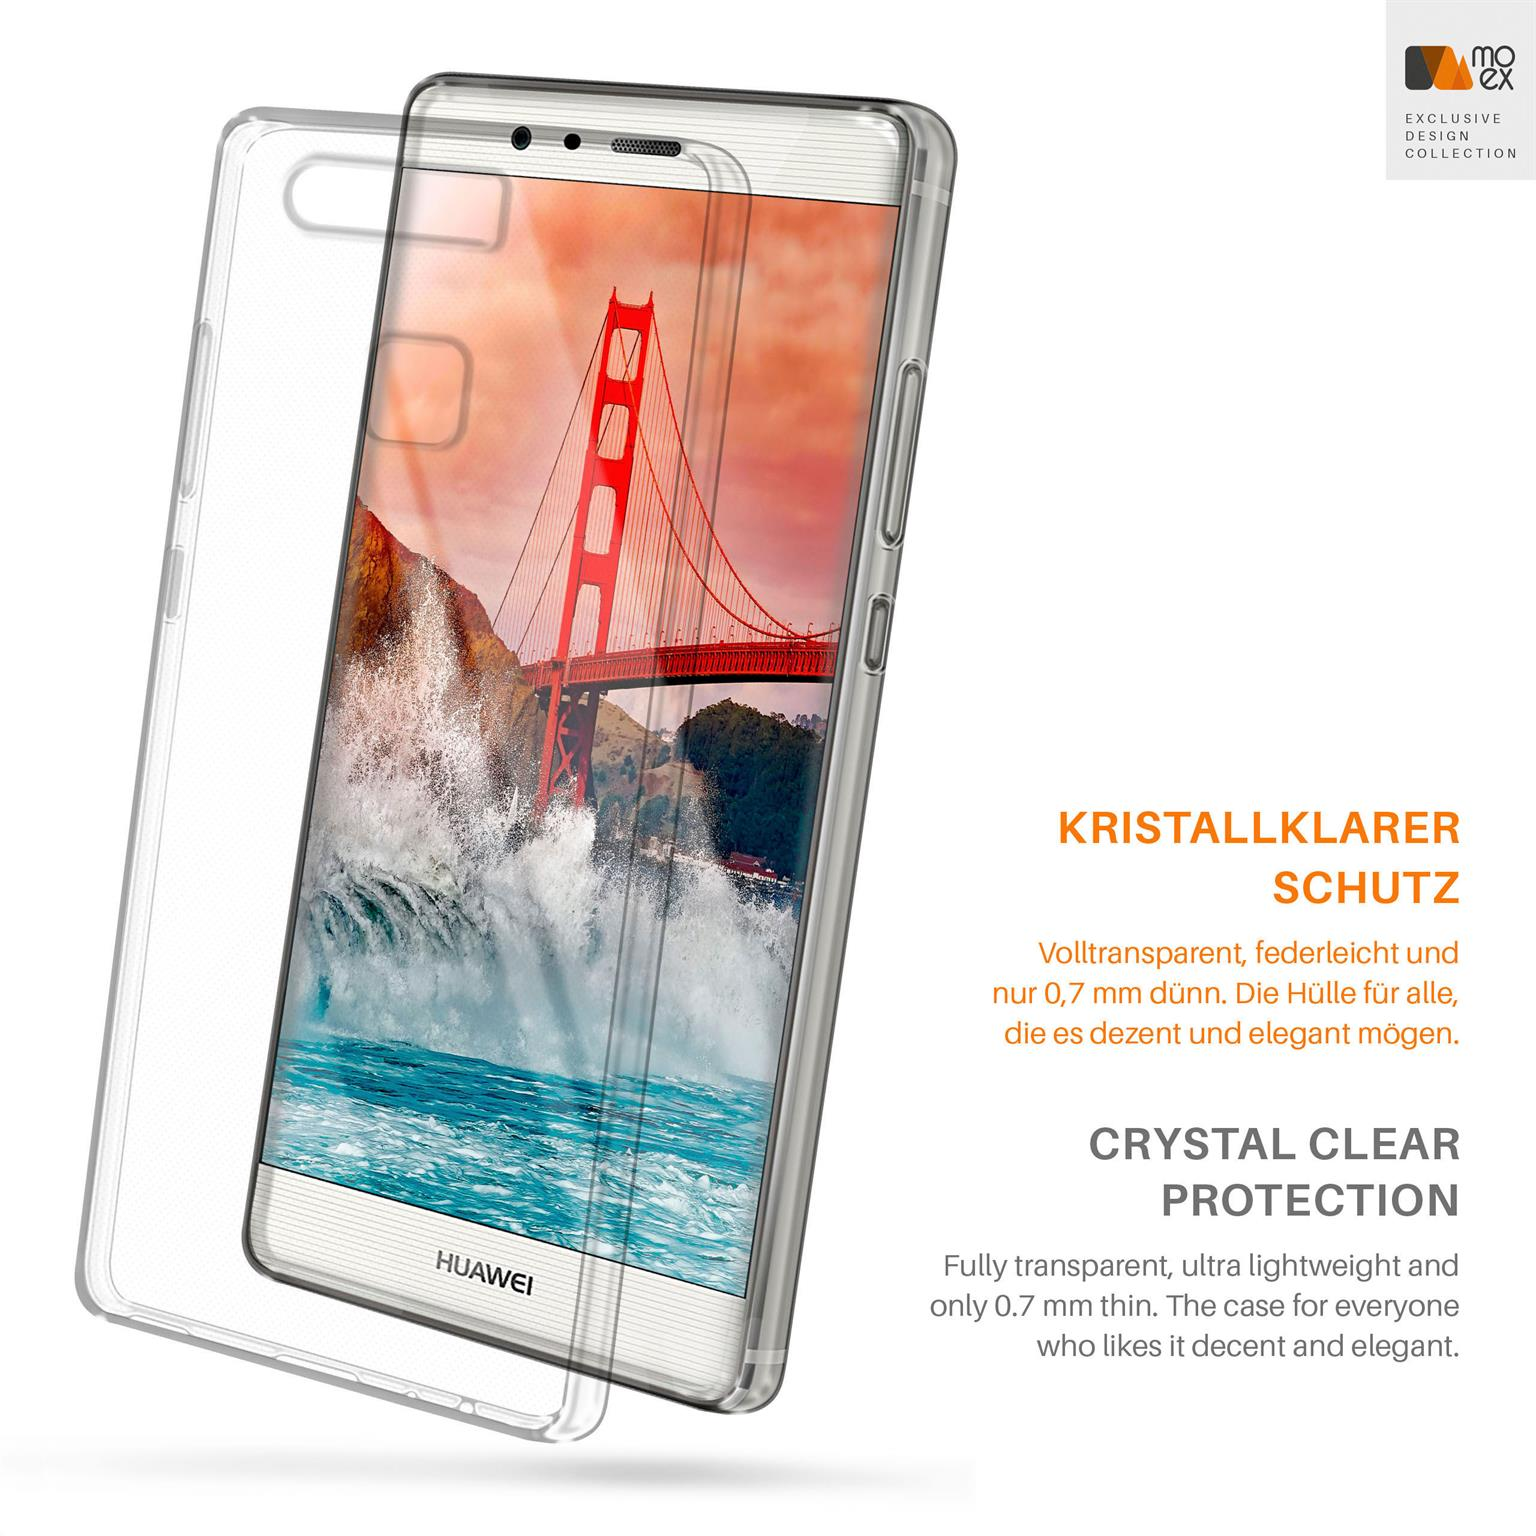 MOEX Aero Huawei, Backcover, Case, Crystal-Clear P9